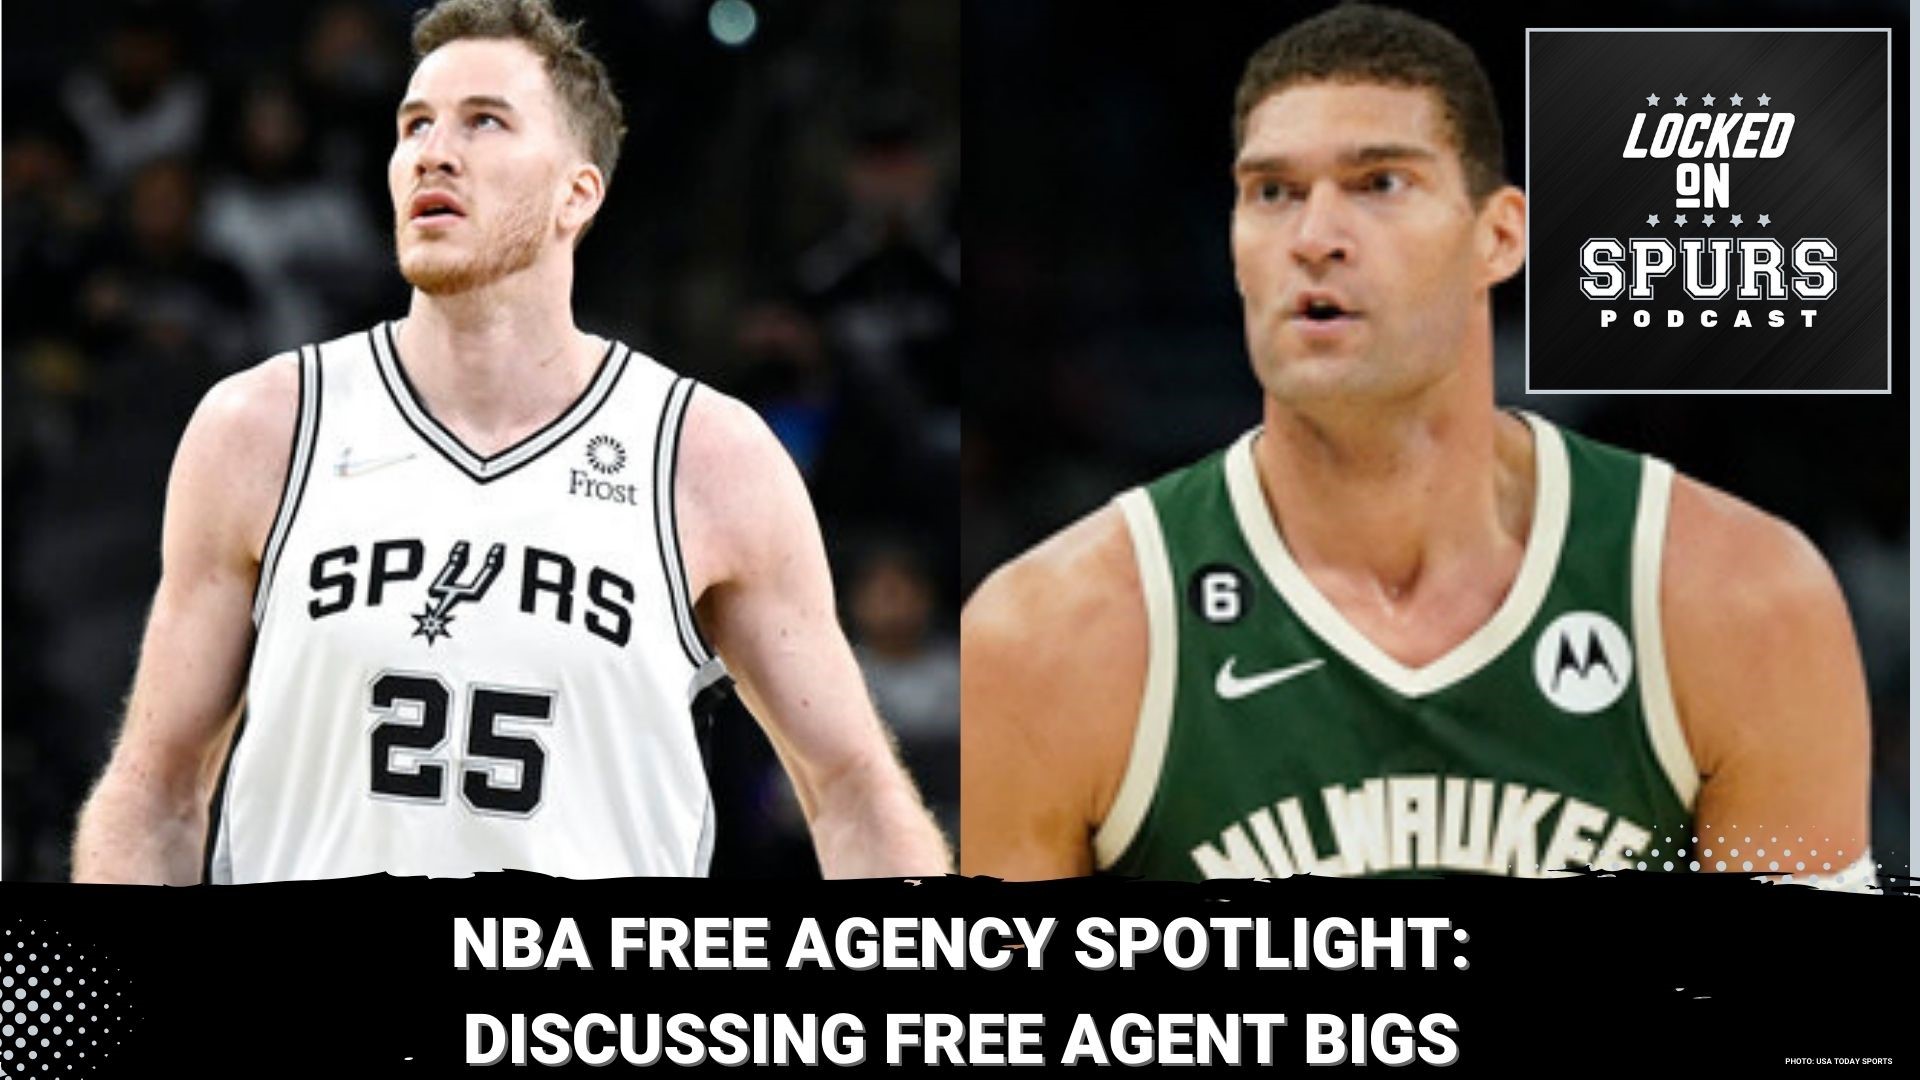 What Brands the Biggest NBA Sneaker Free Agents Should Sign To